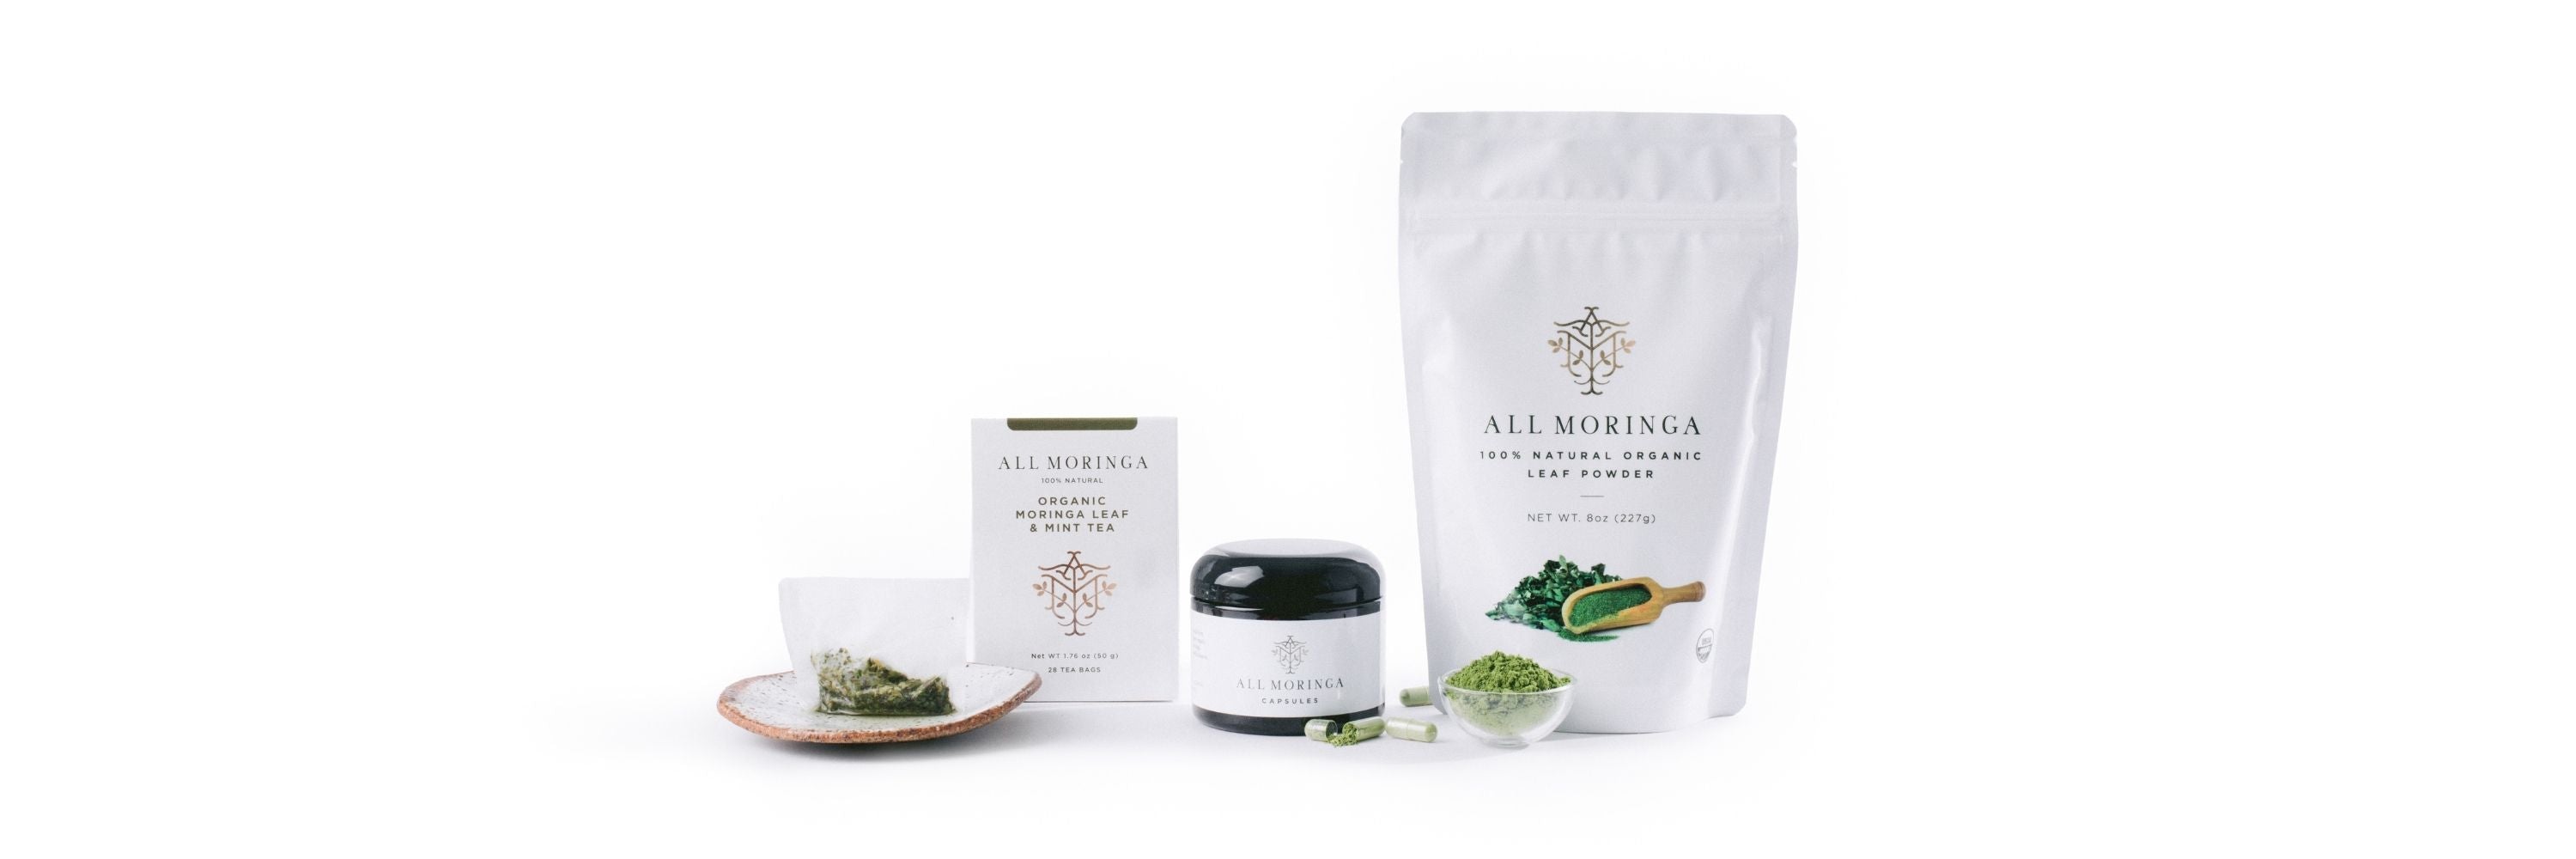 All Moringa products collection for nutrition